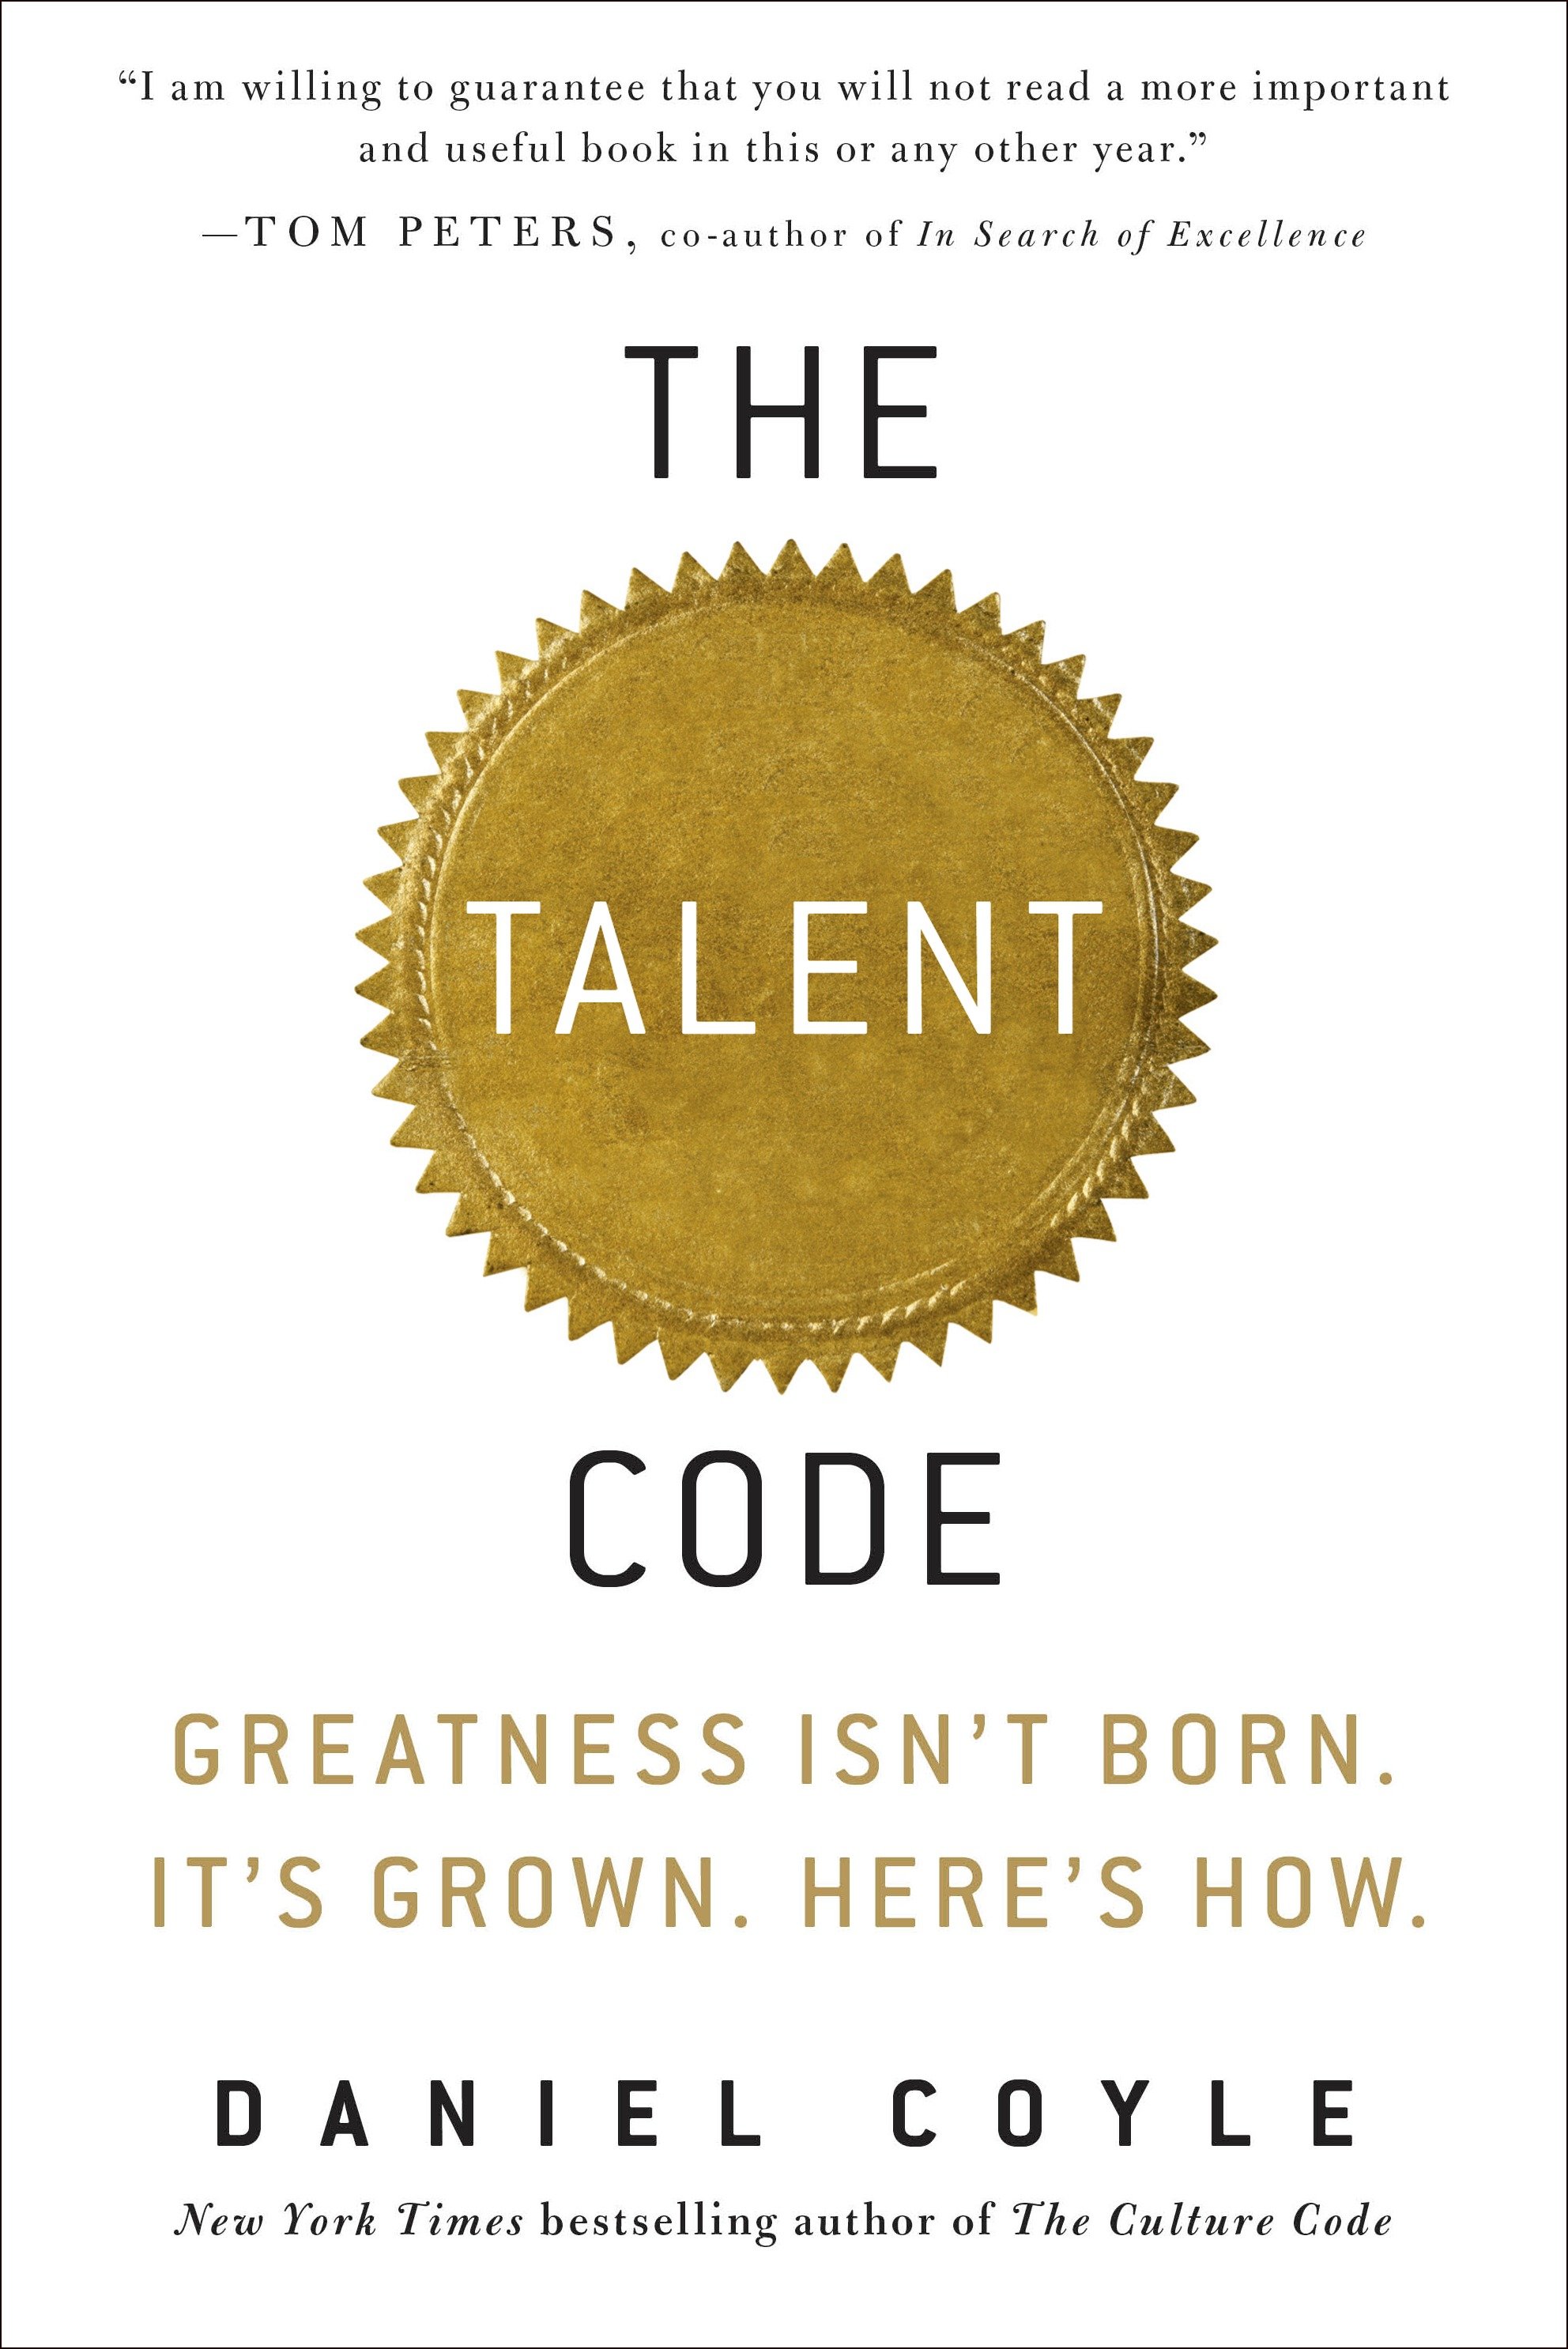 The talent code greatness isn't born, it's grown, here's how cover image